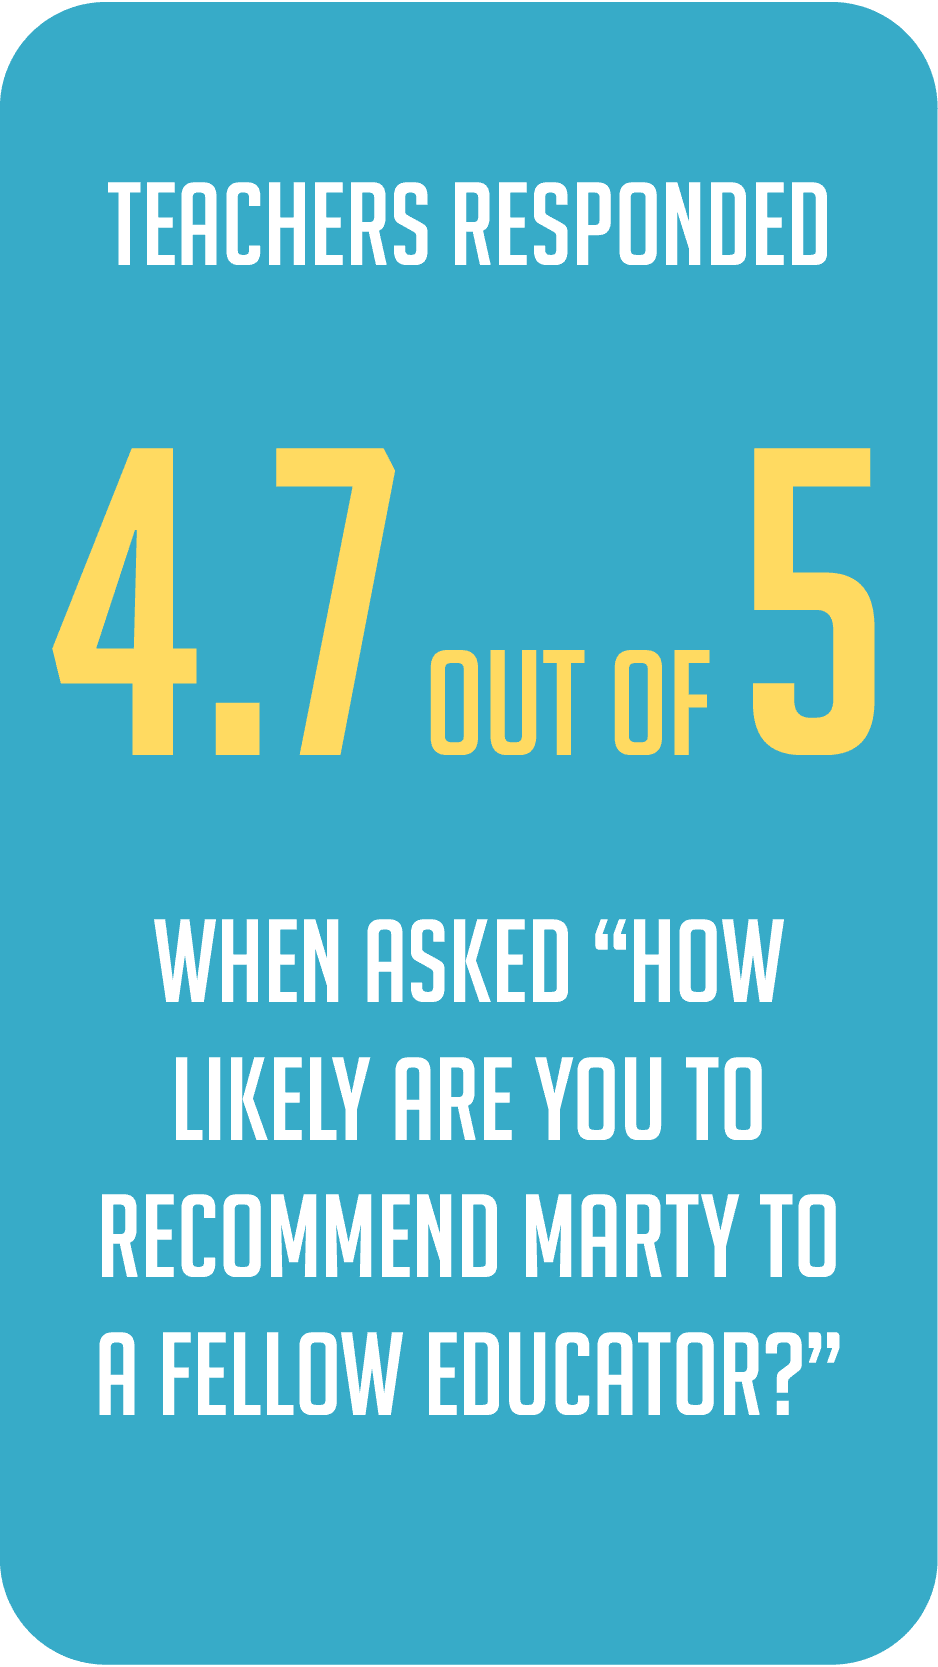 4.7 out of 5 teachers would recommend Marty to a fellow educator.